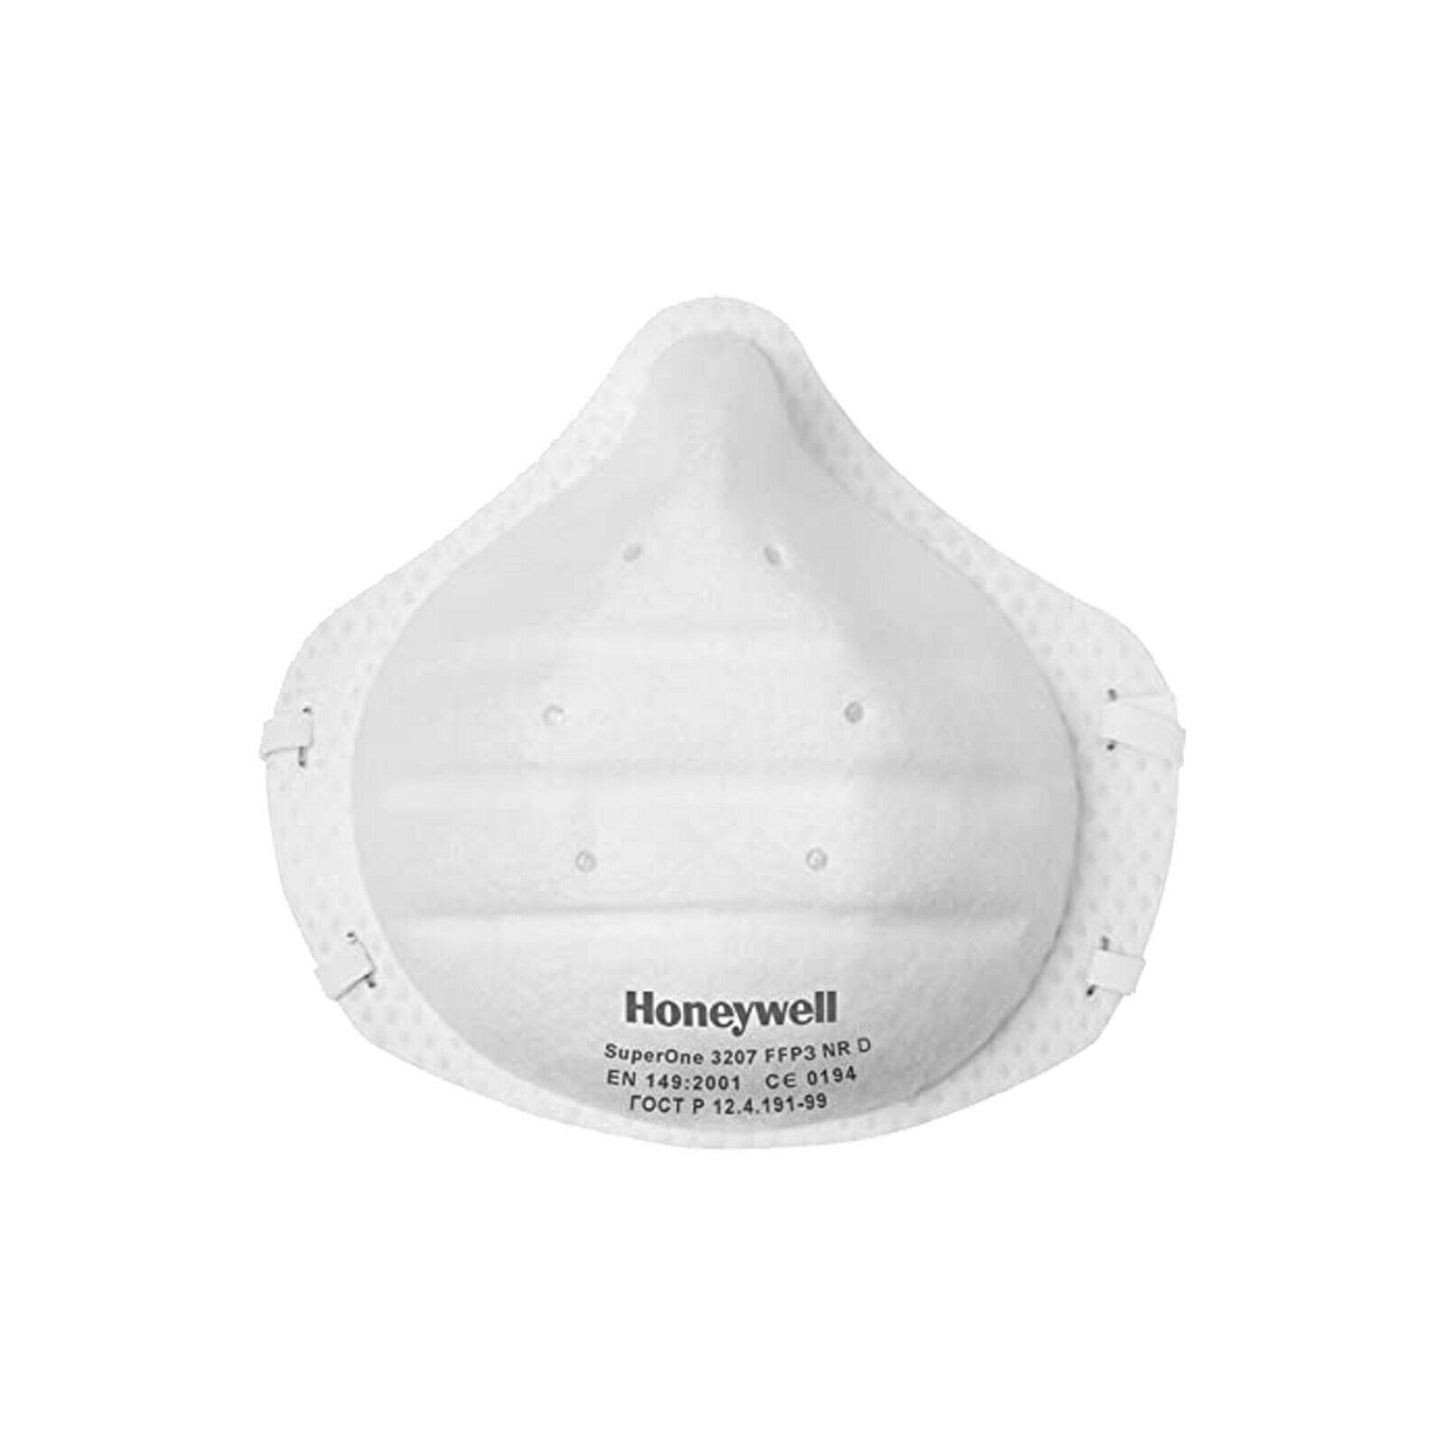 16 X Disposable Mask Honeywell FFP3 Filtering Nose Mouth Respiration Face Mask